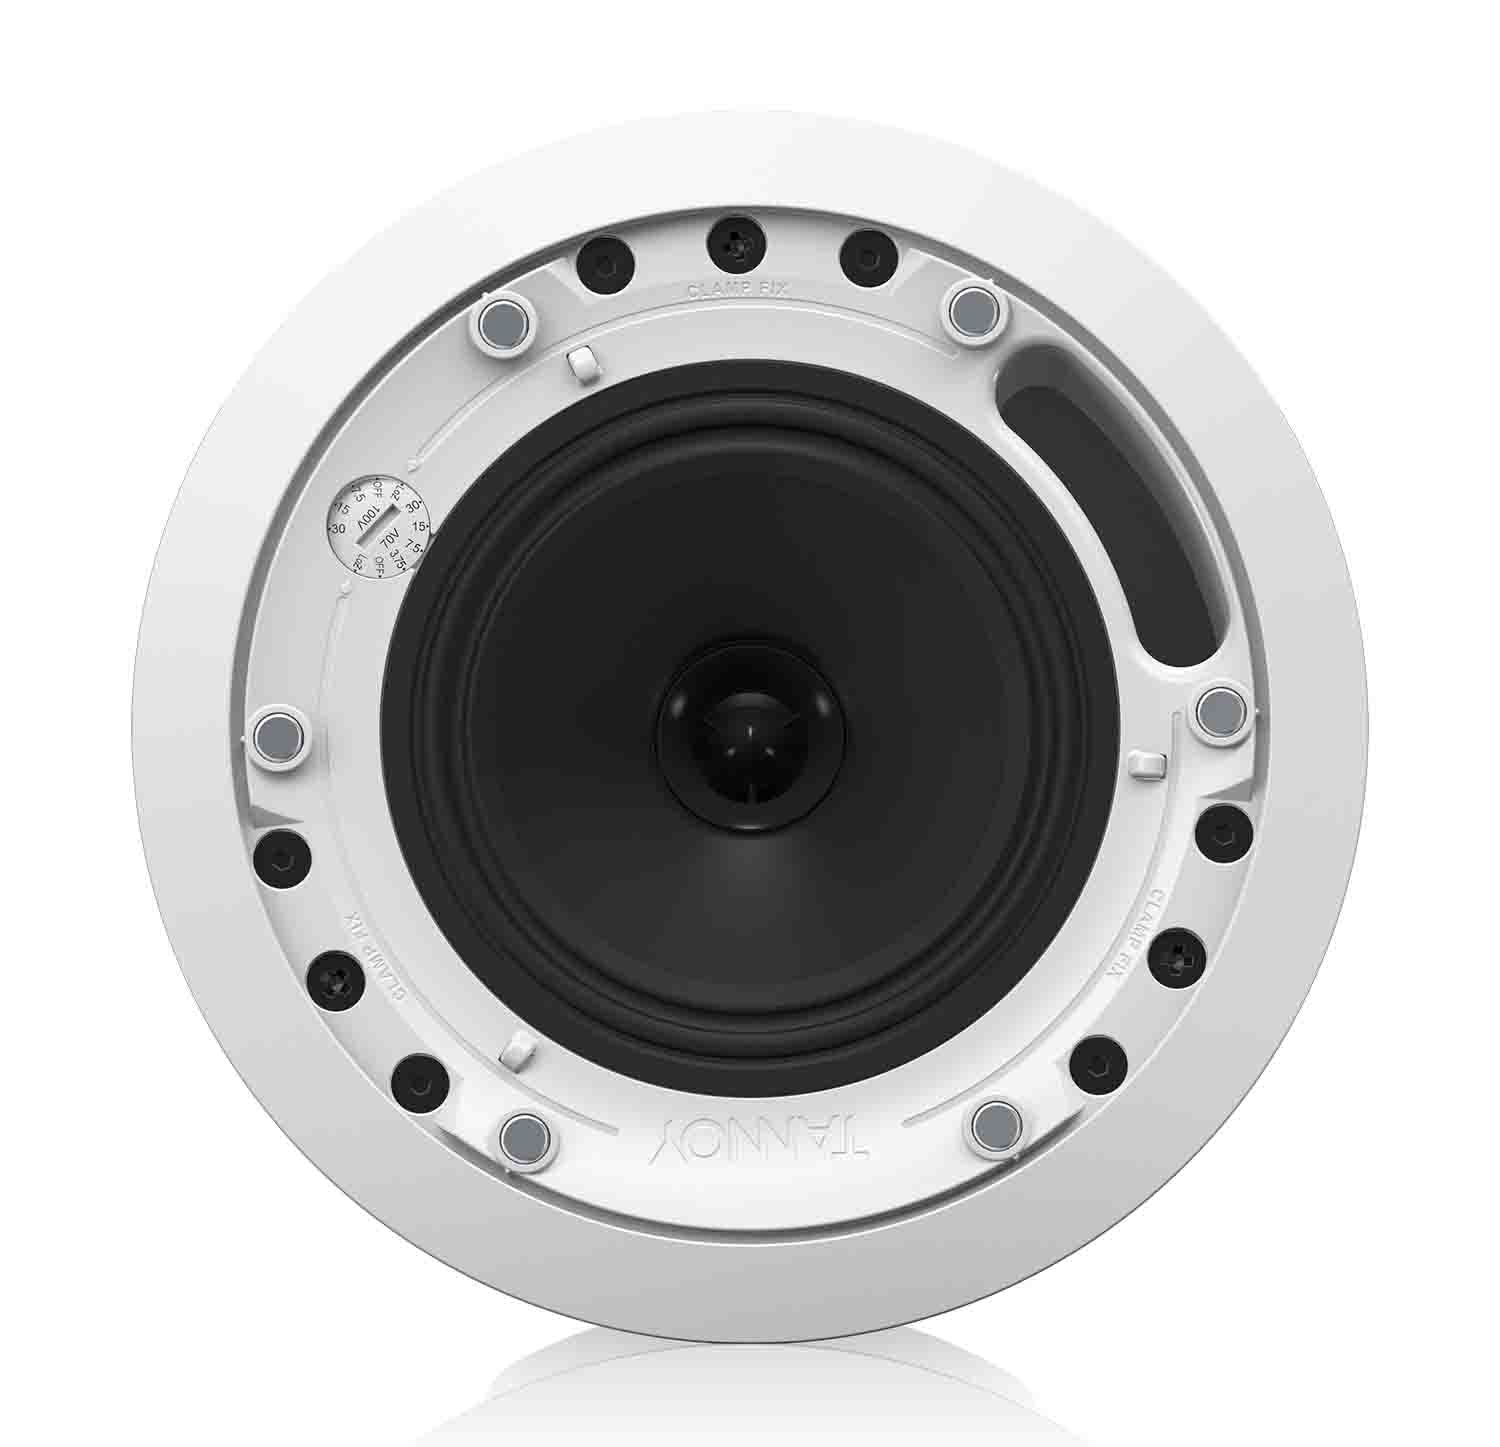 Tannoy CMS 503DC BM, 5-Inch Full Range Ceiling Loudspeaker with Dual Concentric Driver - Blind-Mount - Hollywood DJ